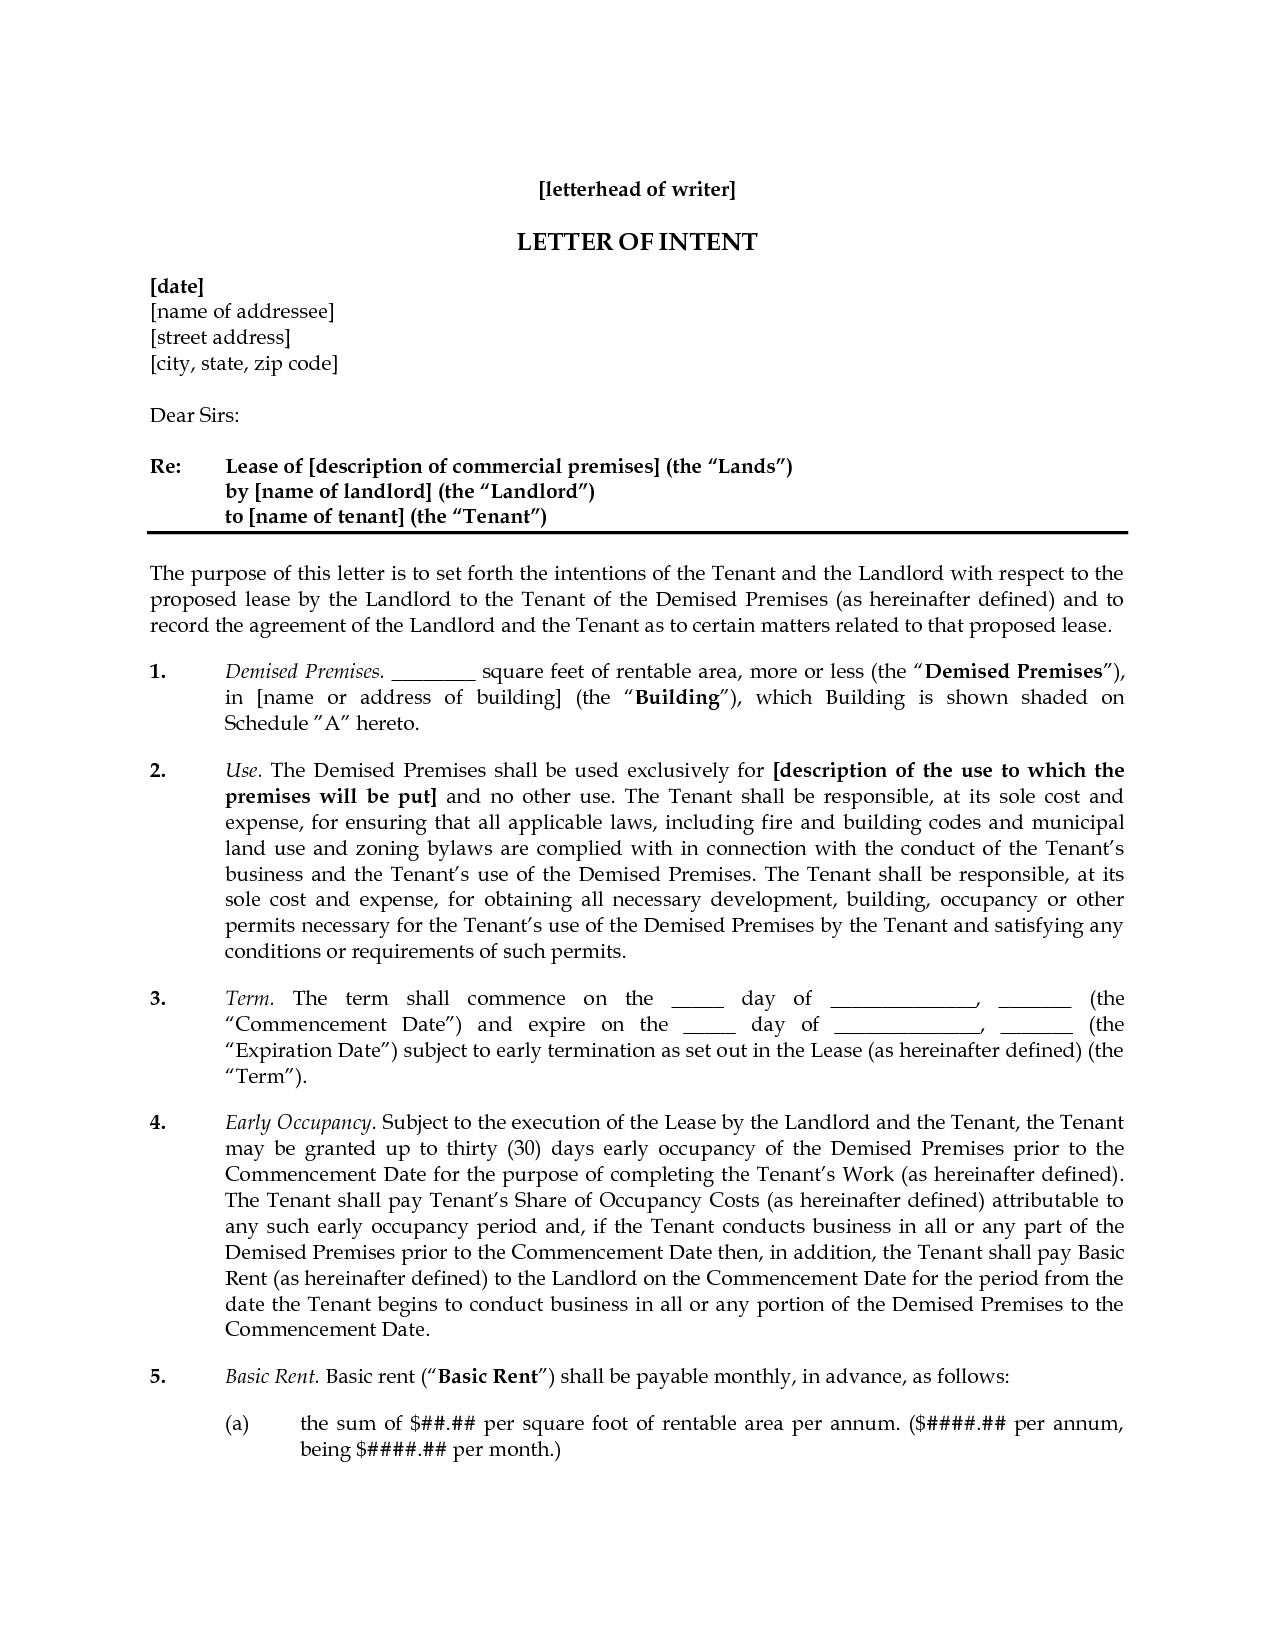 Letter Of Intent to Lease Commercial Property Template - Letter Intent Real Estate Lease Mercial Image Ideas Sample to